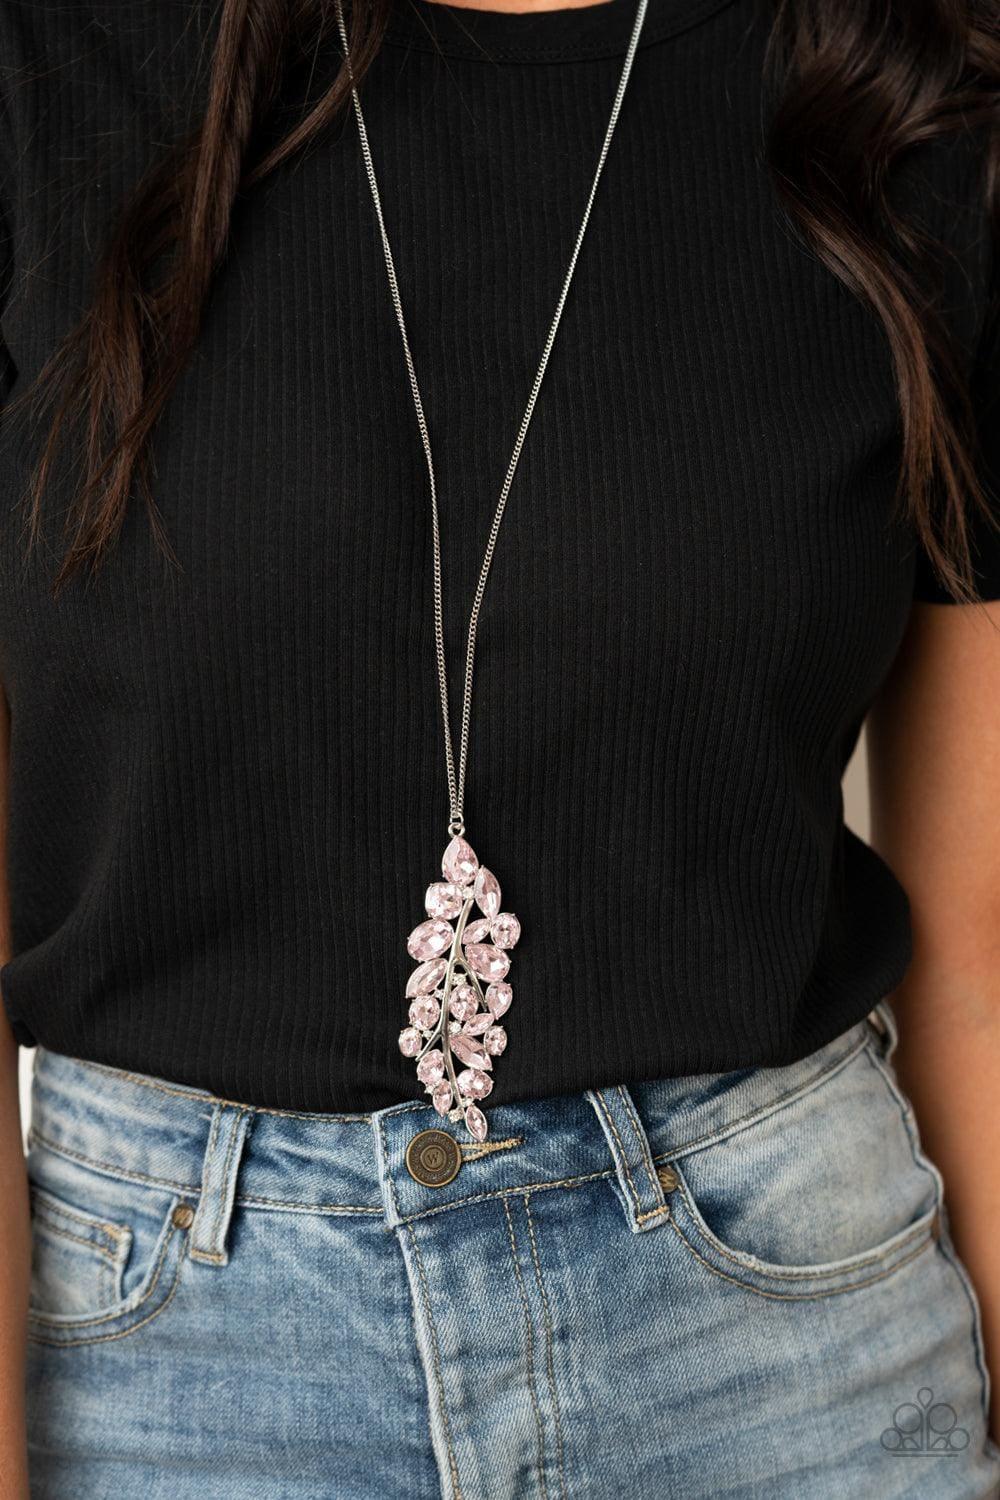 Paparazzi Accessories - Take a Final Bough - Pink Necklace - Bling by JessieK